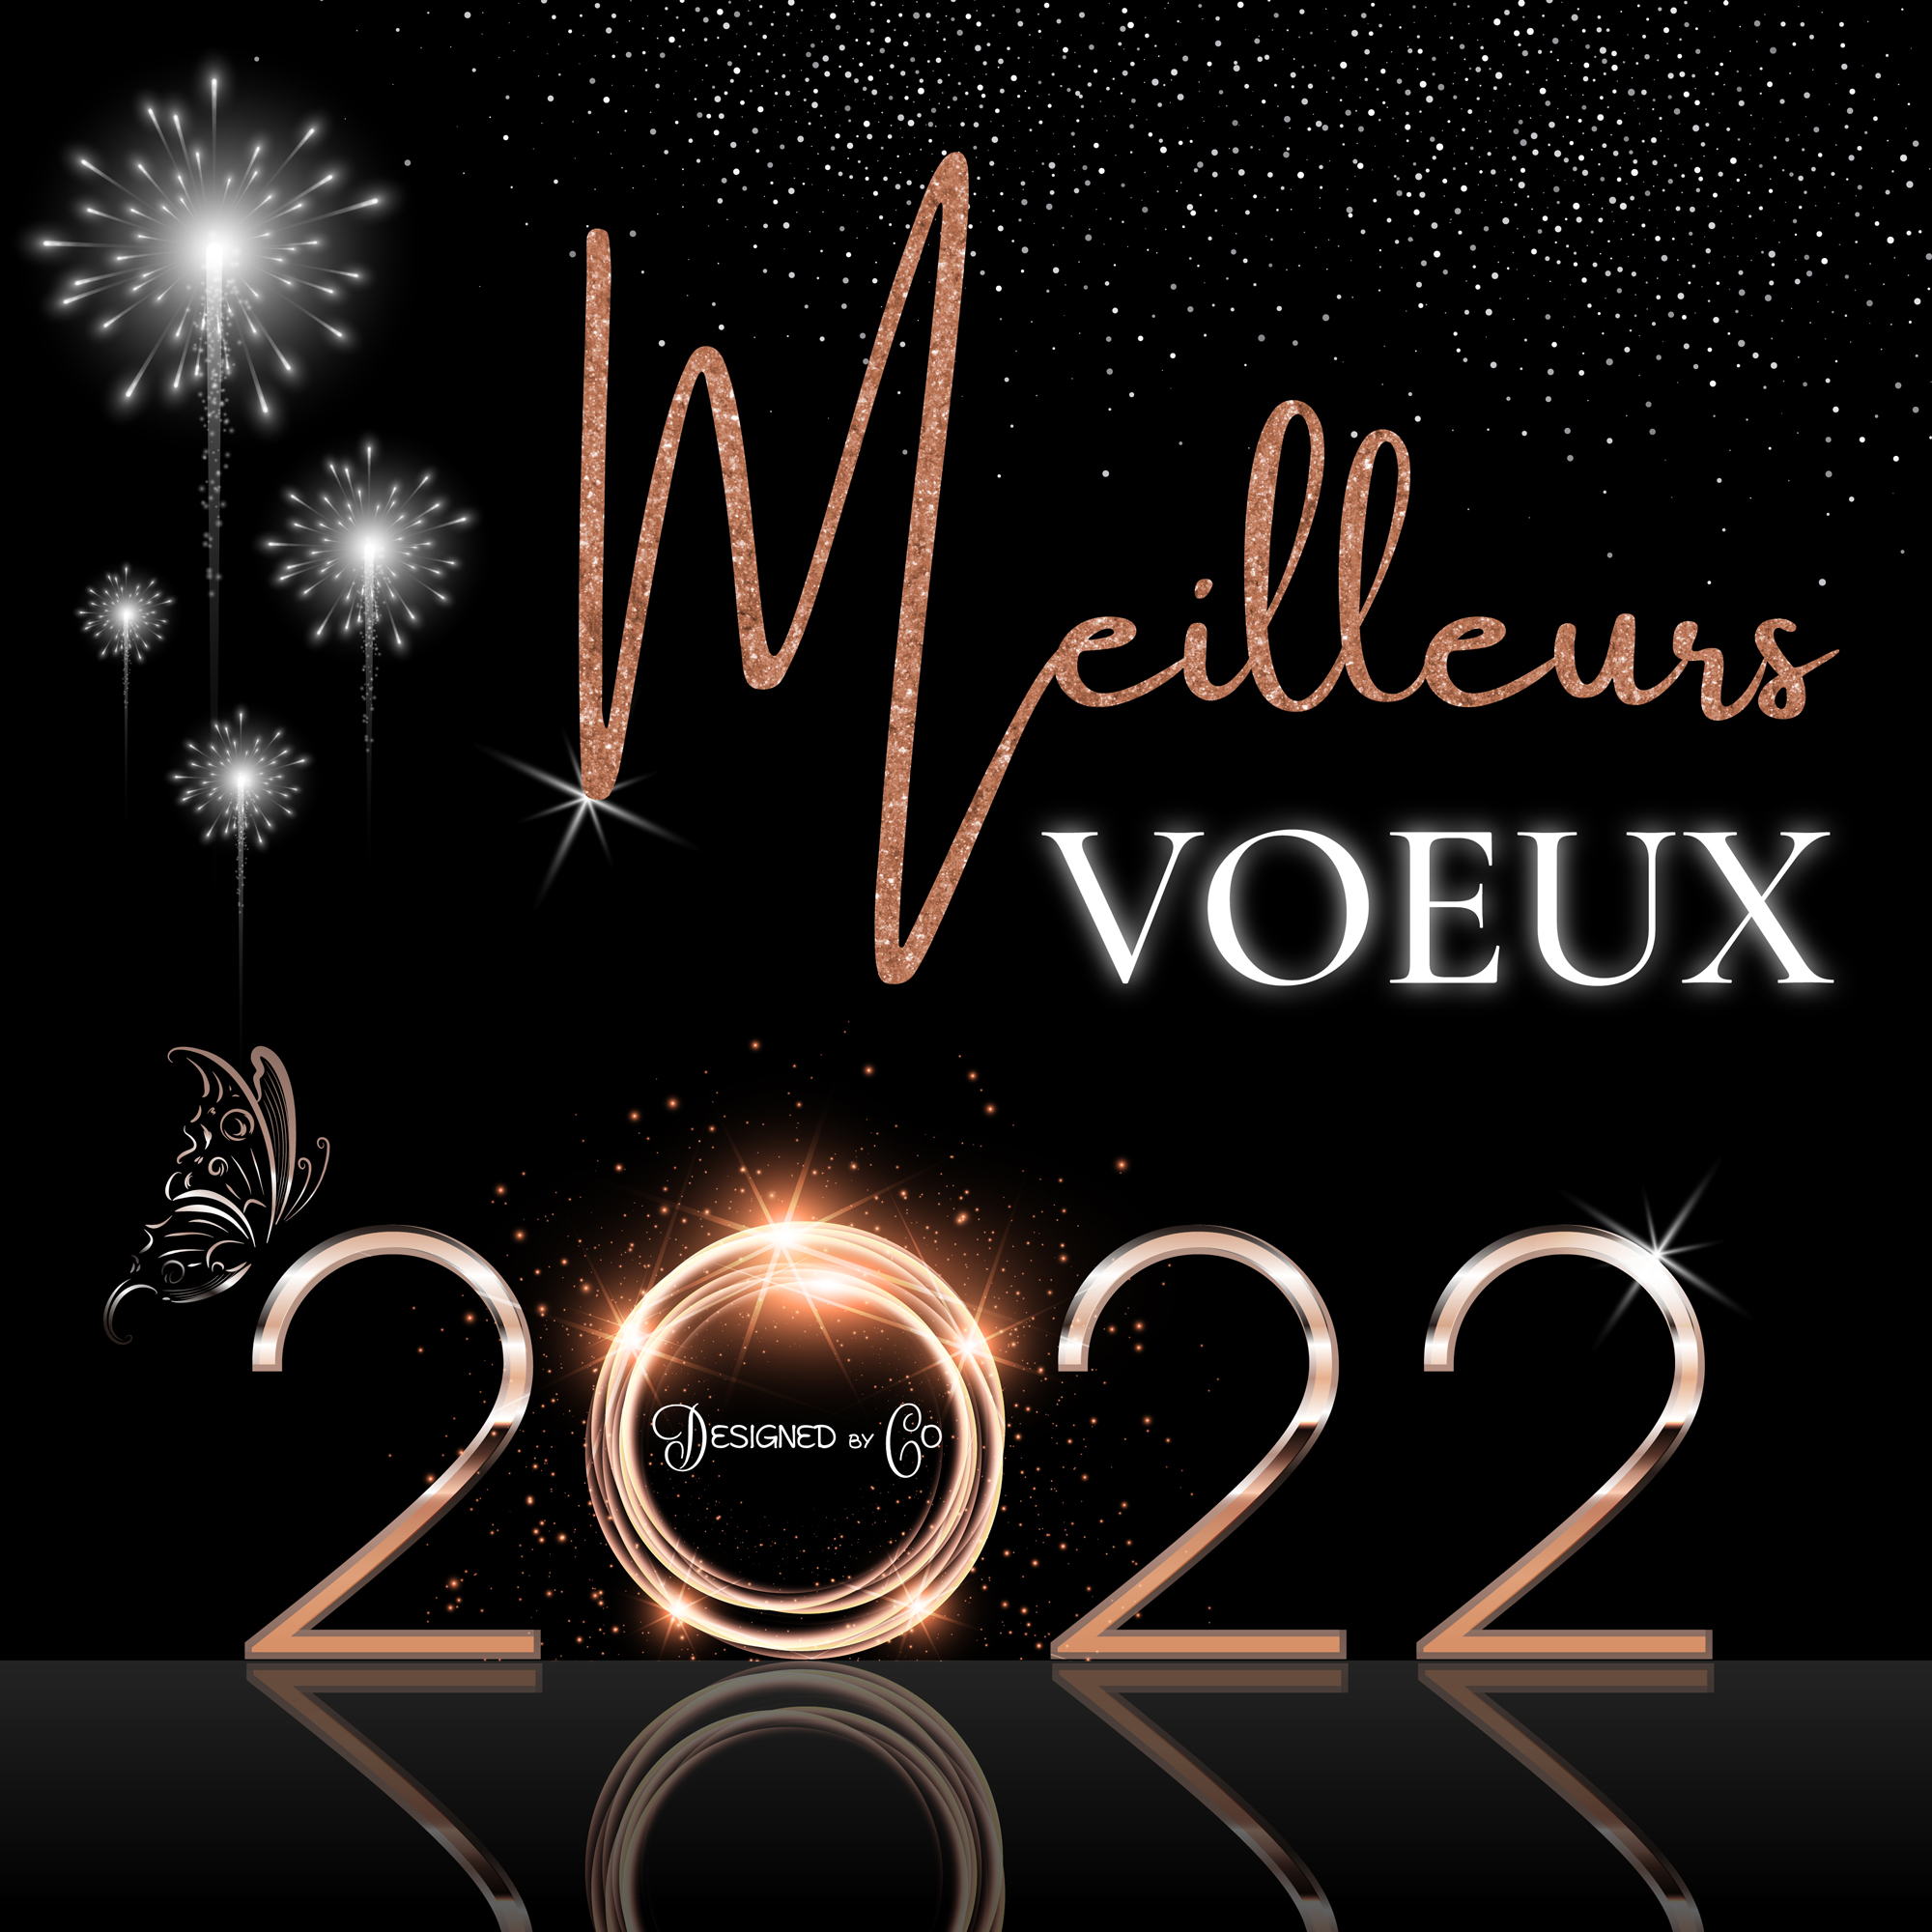 Voeux 2022 Designed by Co